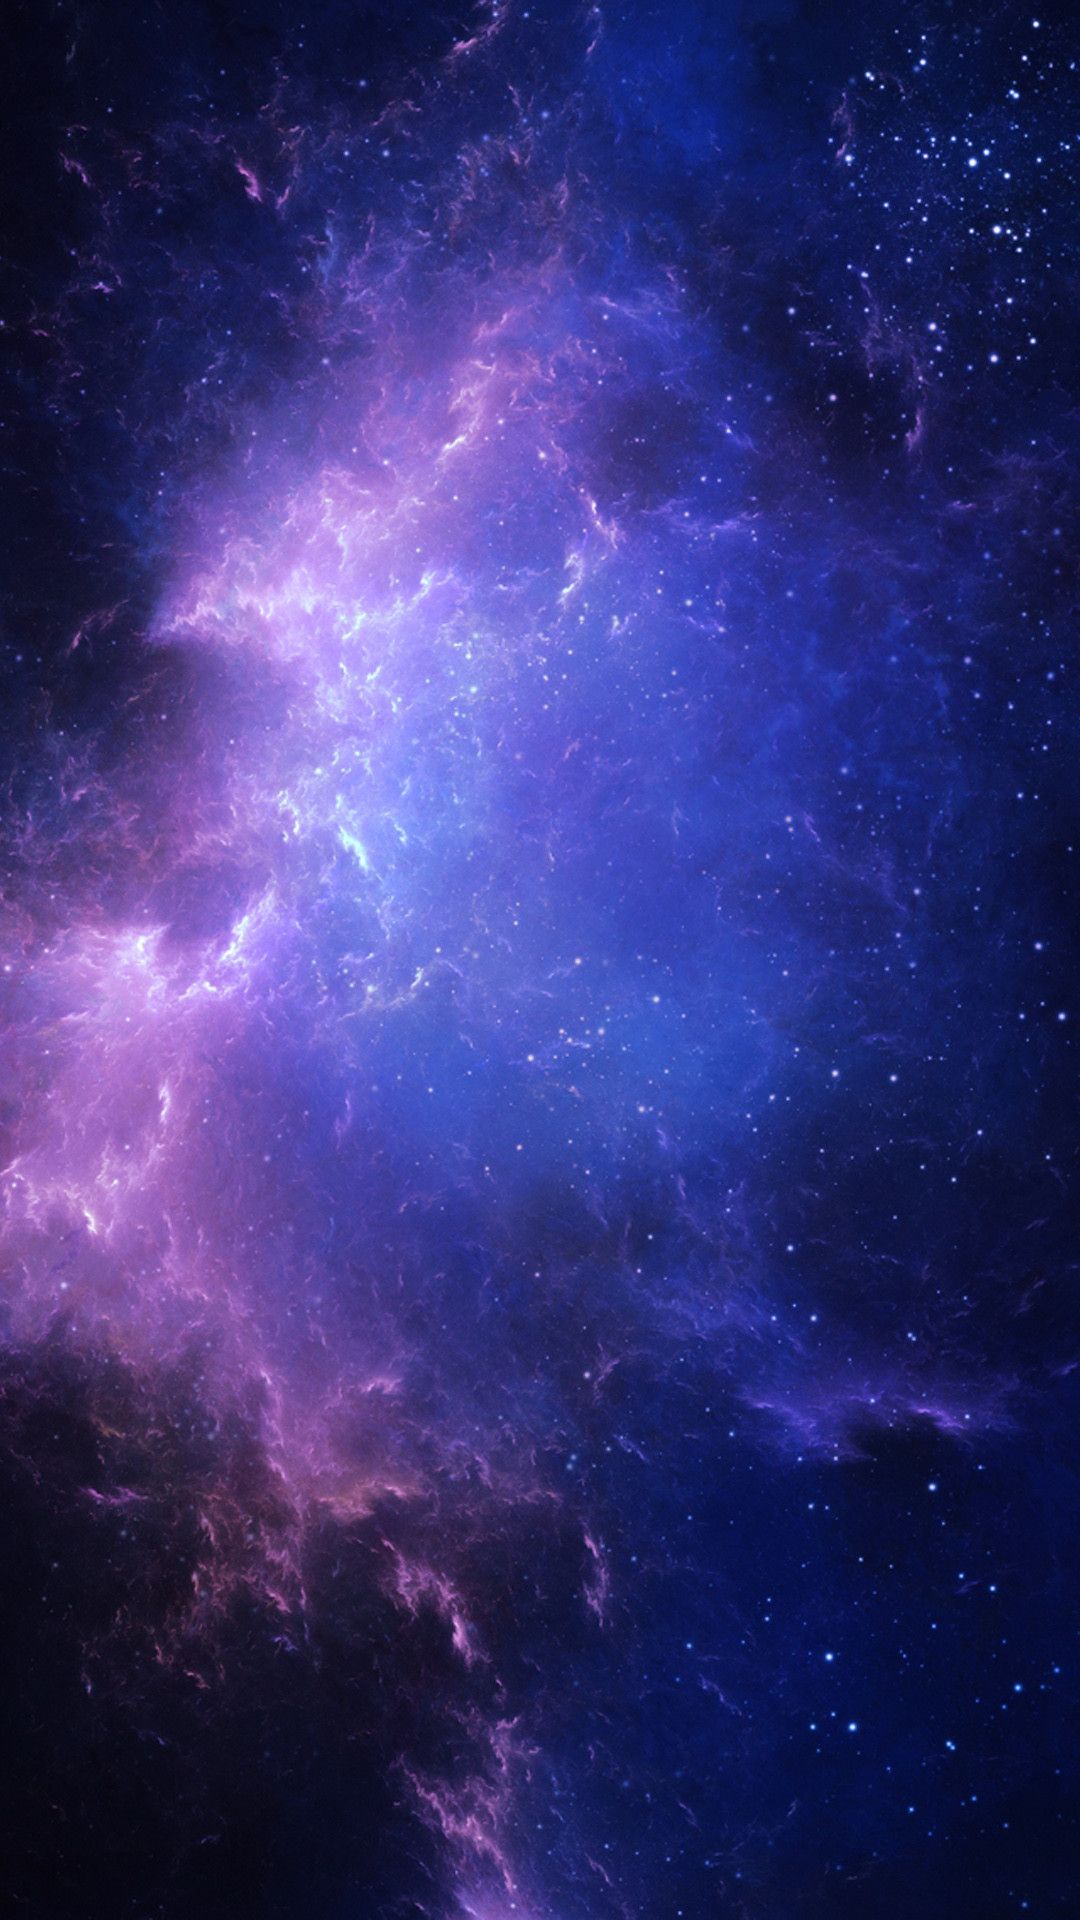 Purple Galaxy Space With Stars Background Wallpaper Image For Free Download   Pngtree